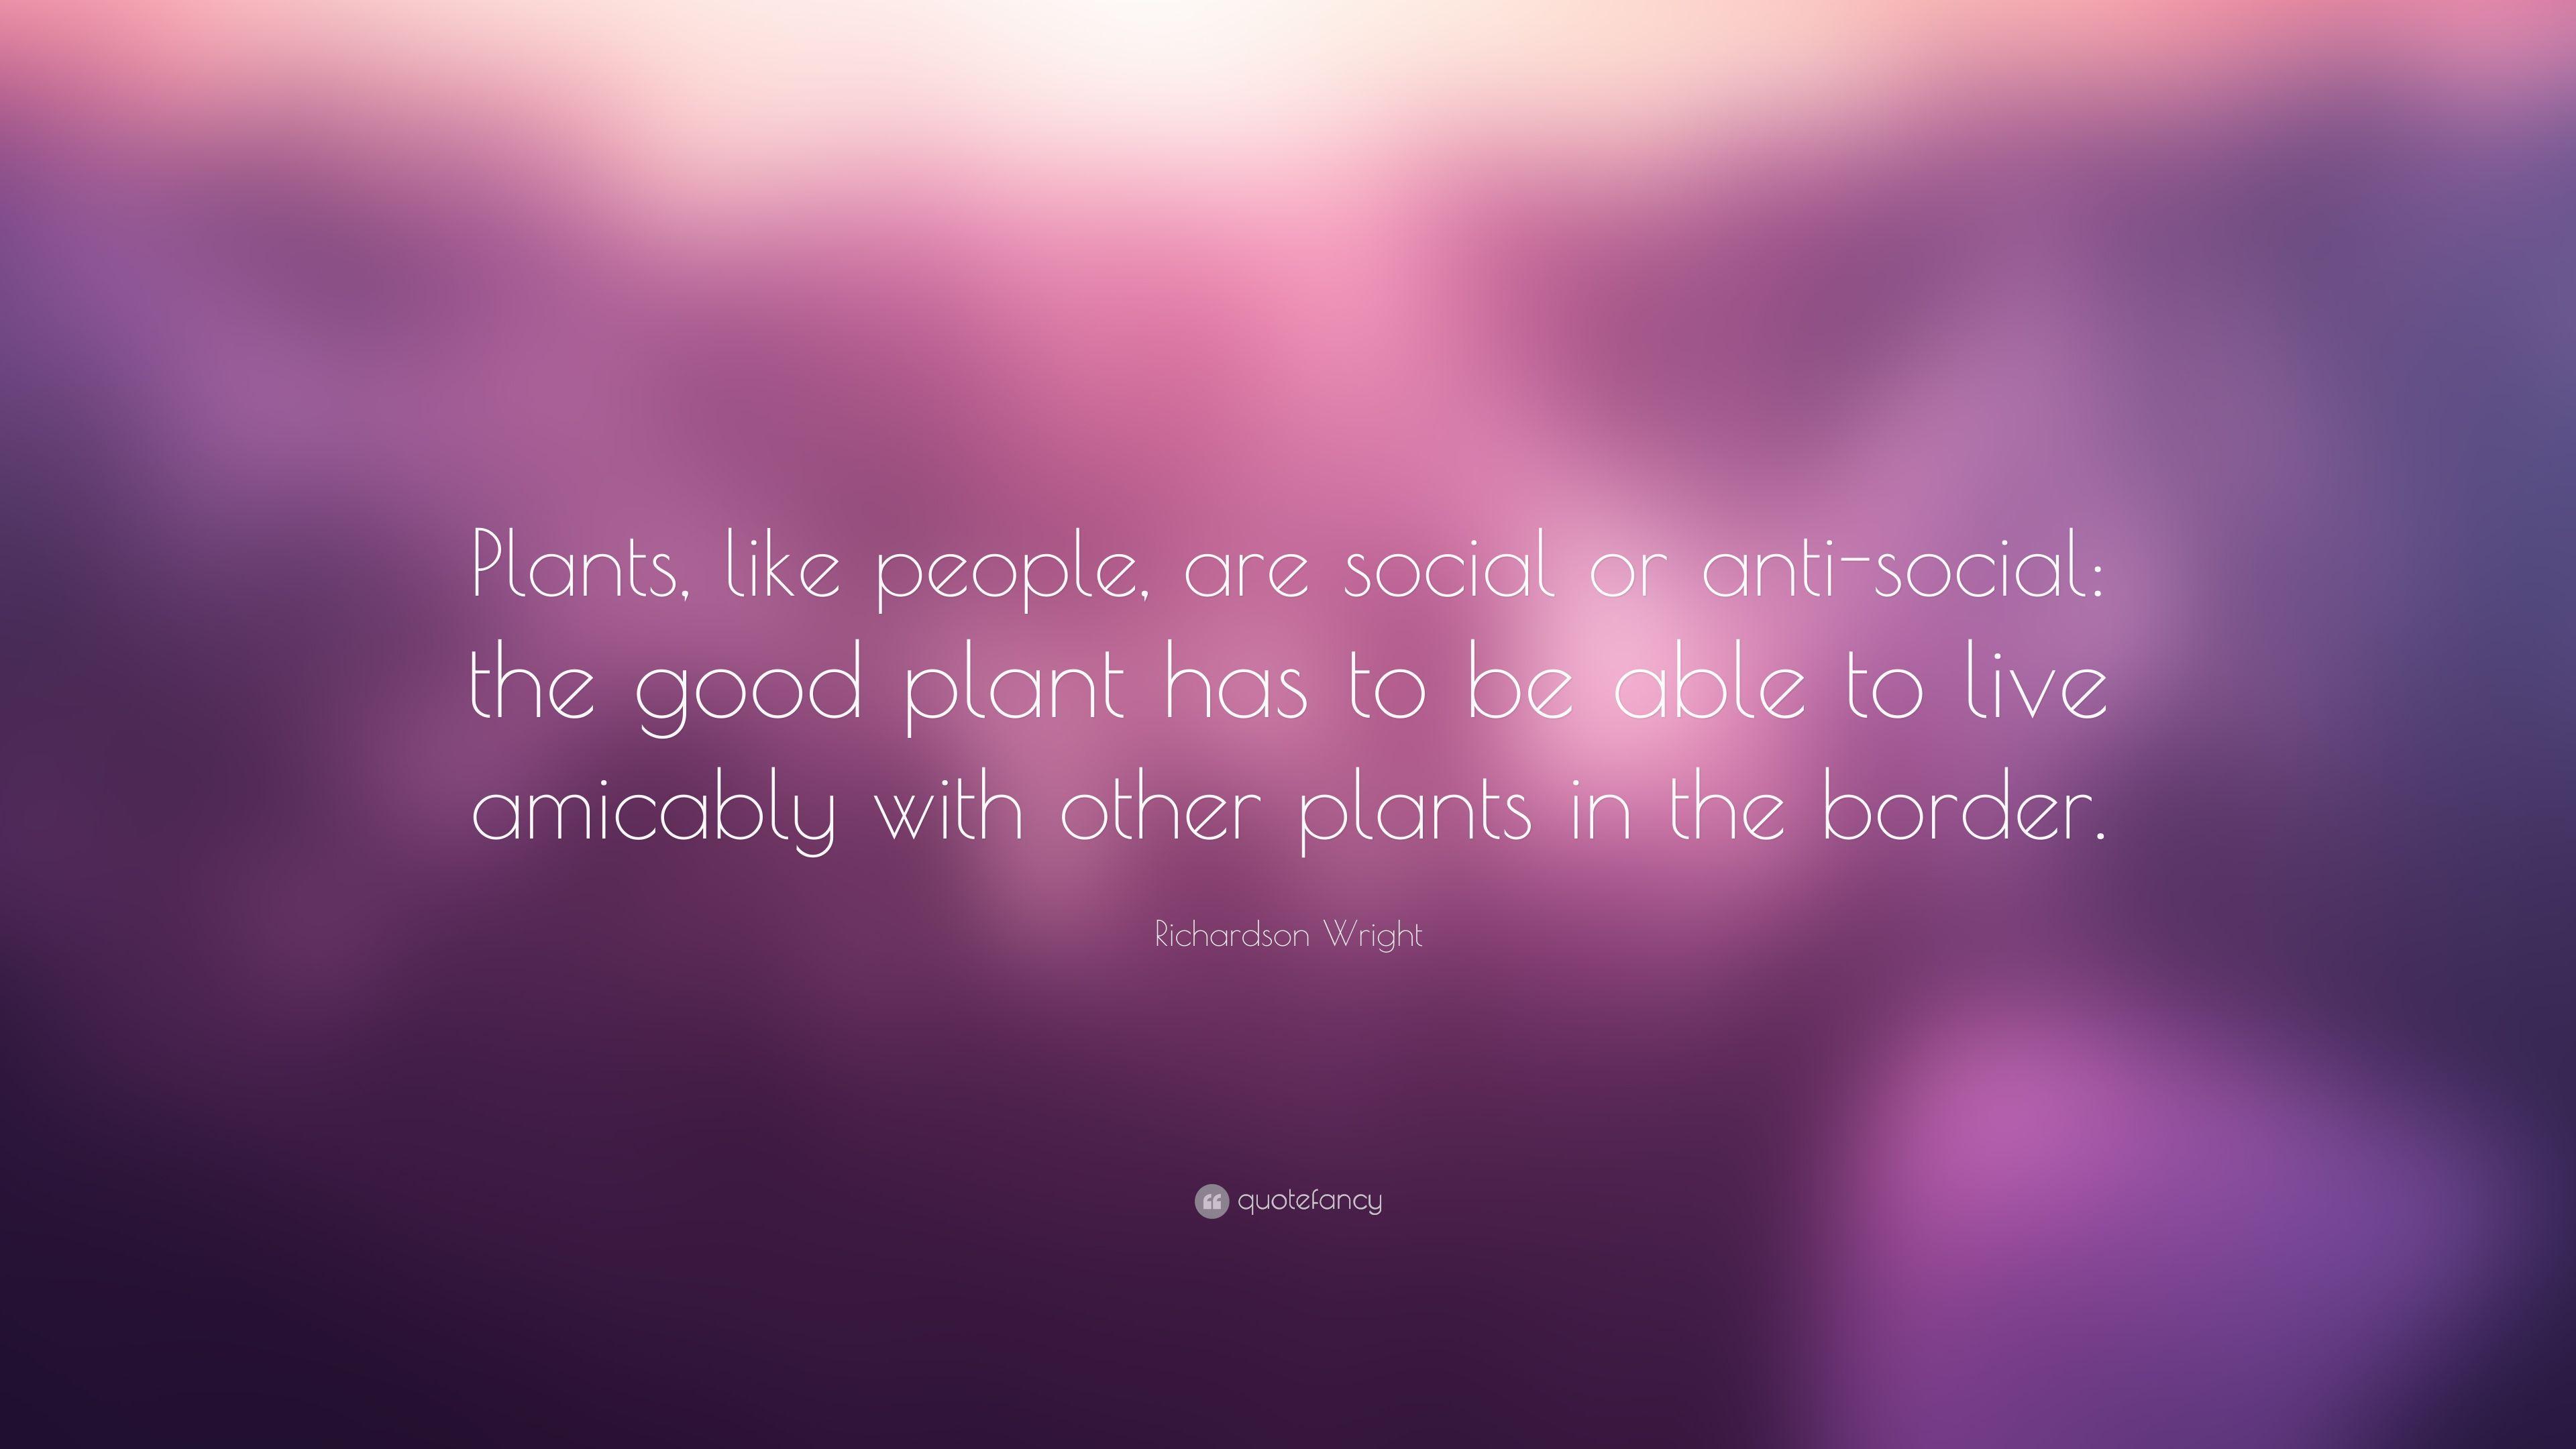 Richardson Wright Quote: “Plants, like people, are social or anti